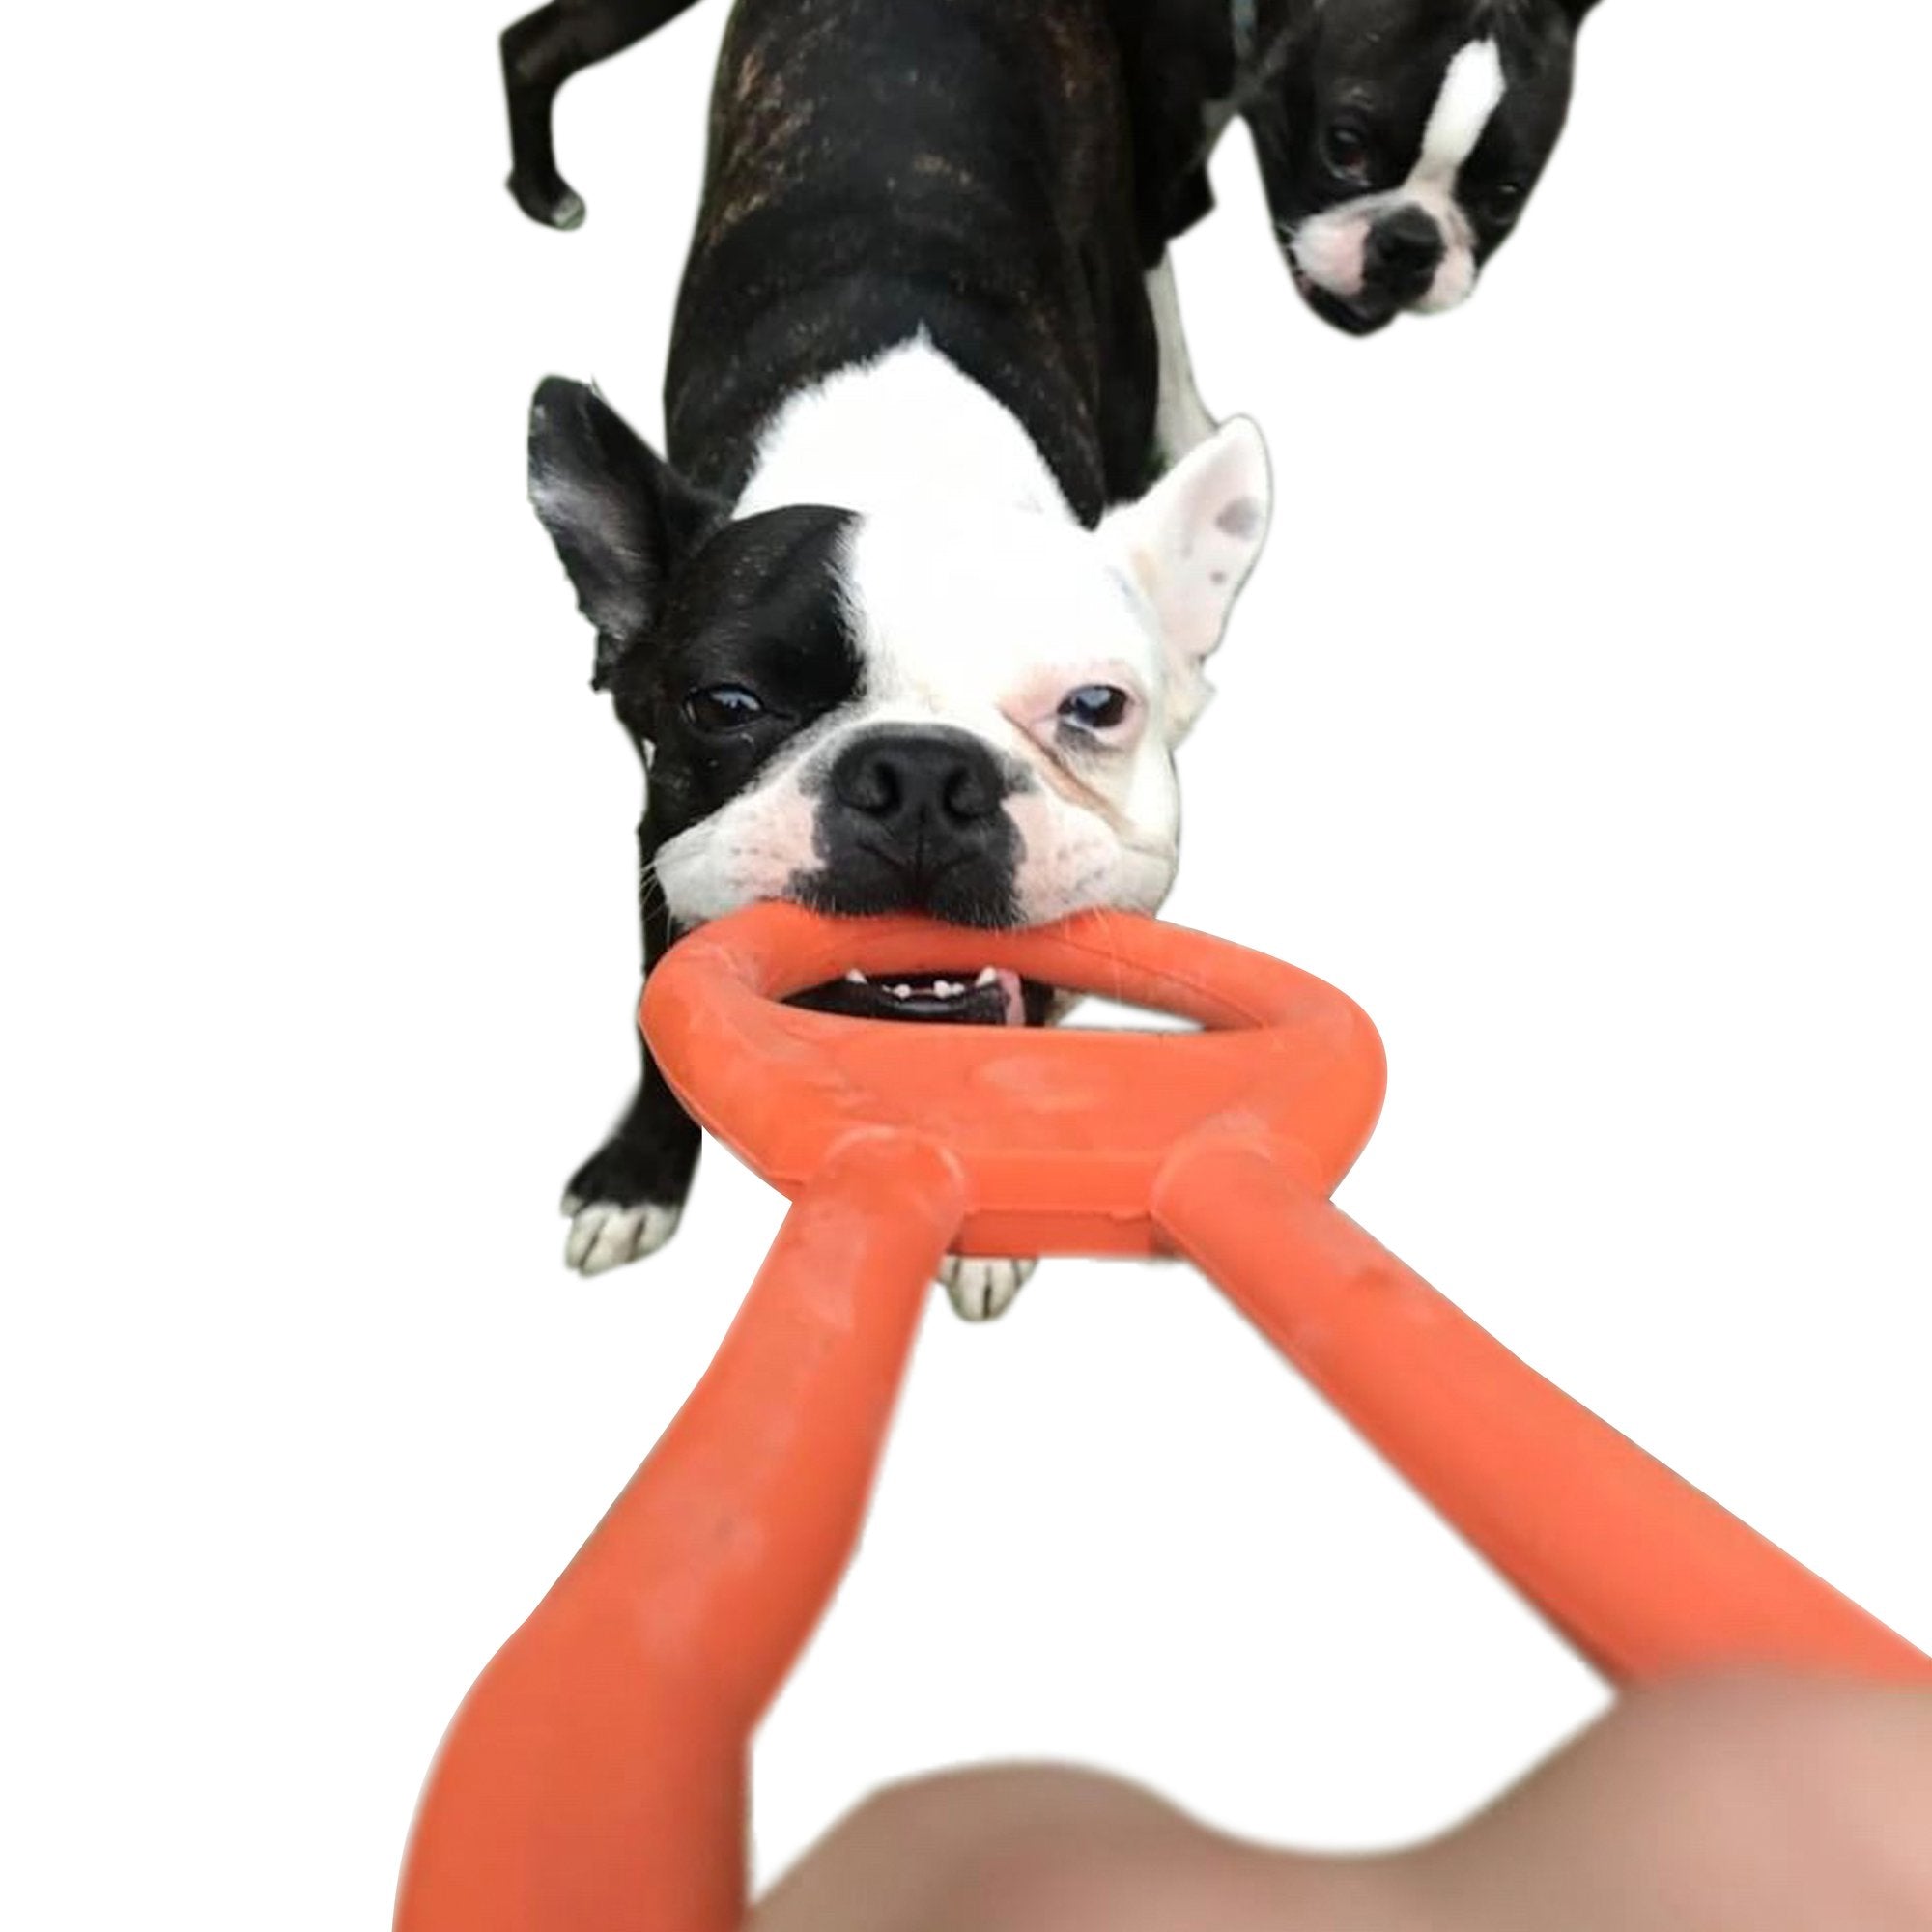 ROVER PET PRODUCTS - SodaPup Can Opener Tug Toy